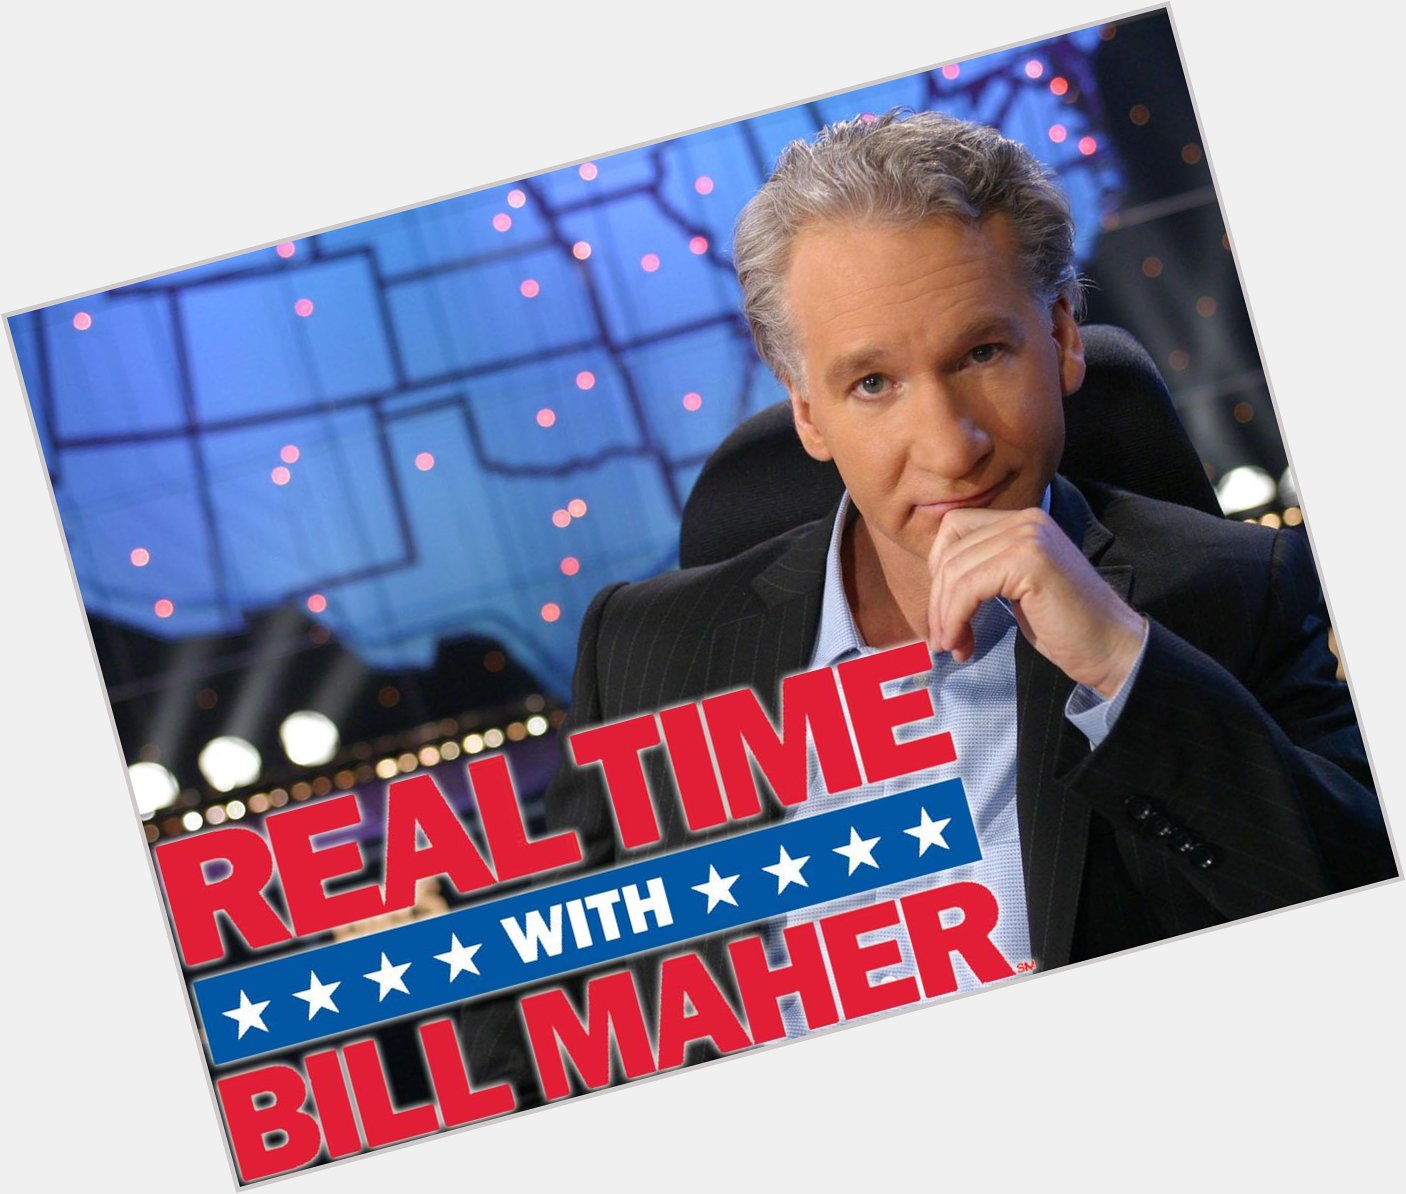 Happy Birthday to Bill Maher, who turns 59 today! 